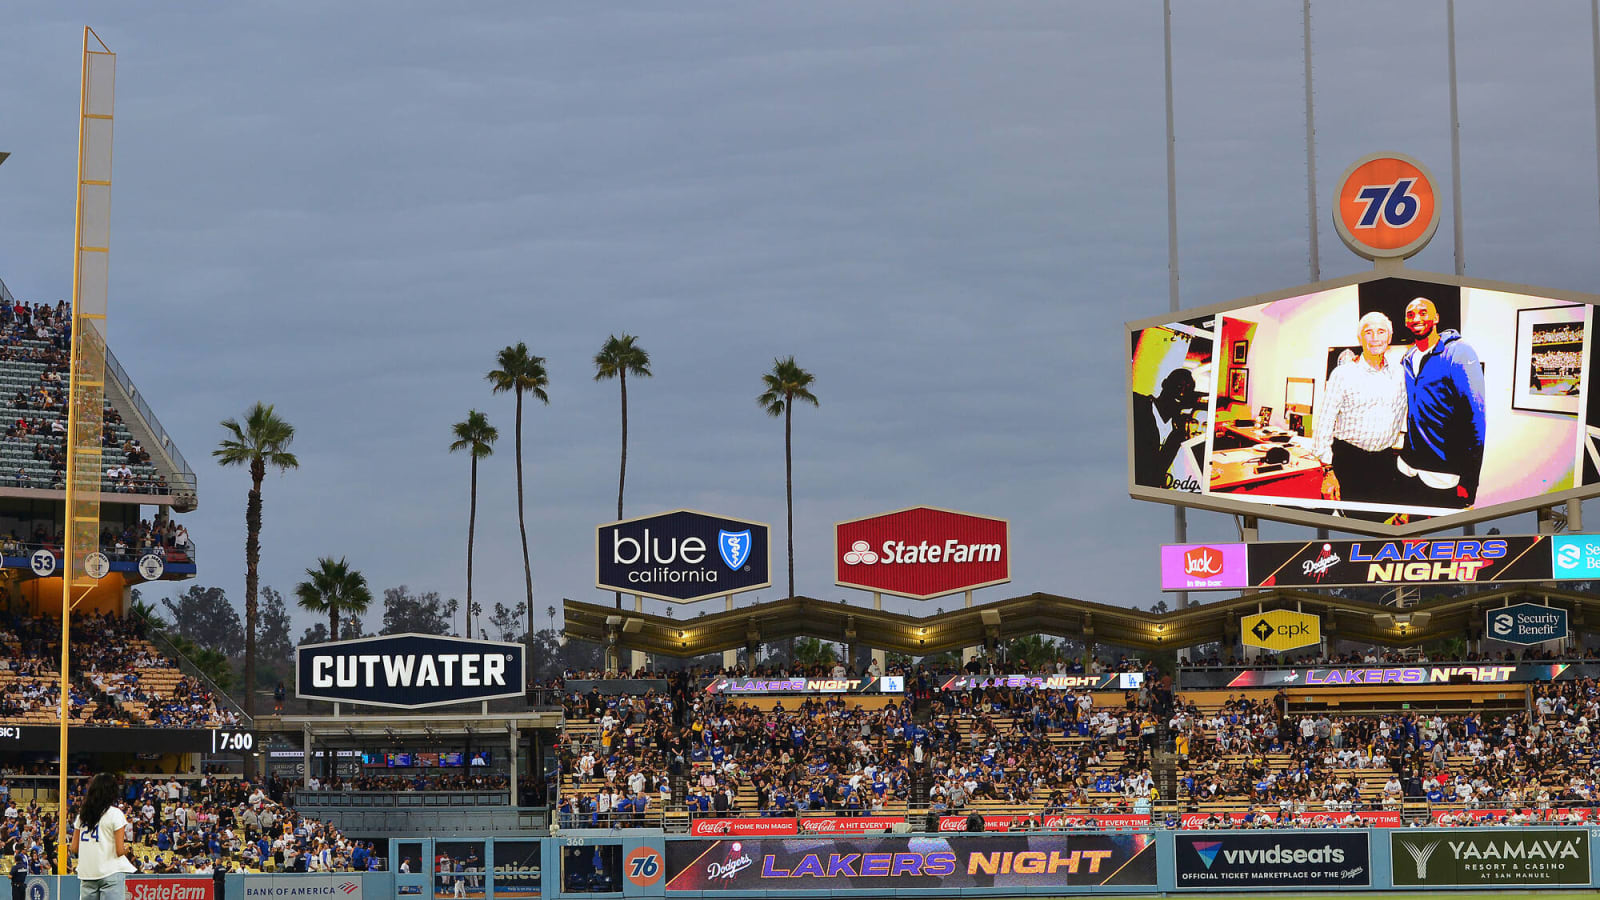 Dodgers Video: Kobe Bryant Drone Show For Lakers Night At Dodger Stadium